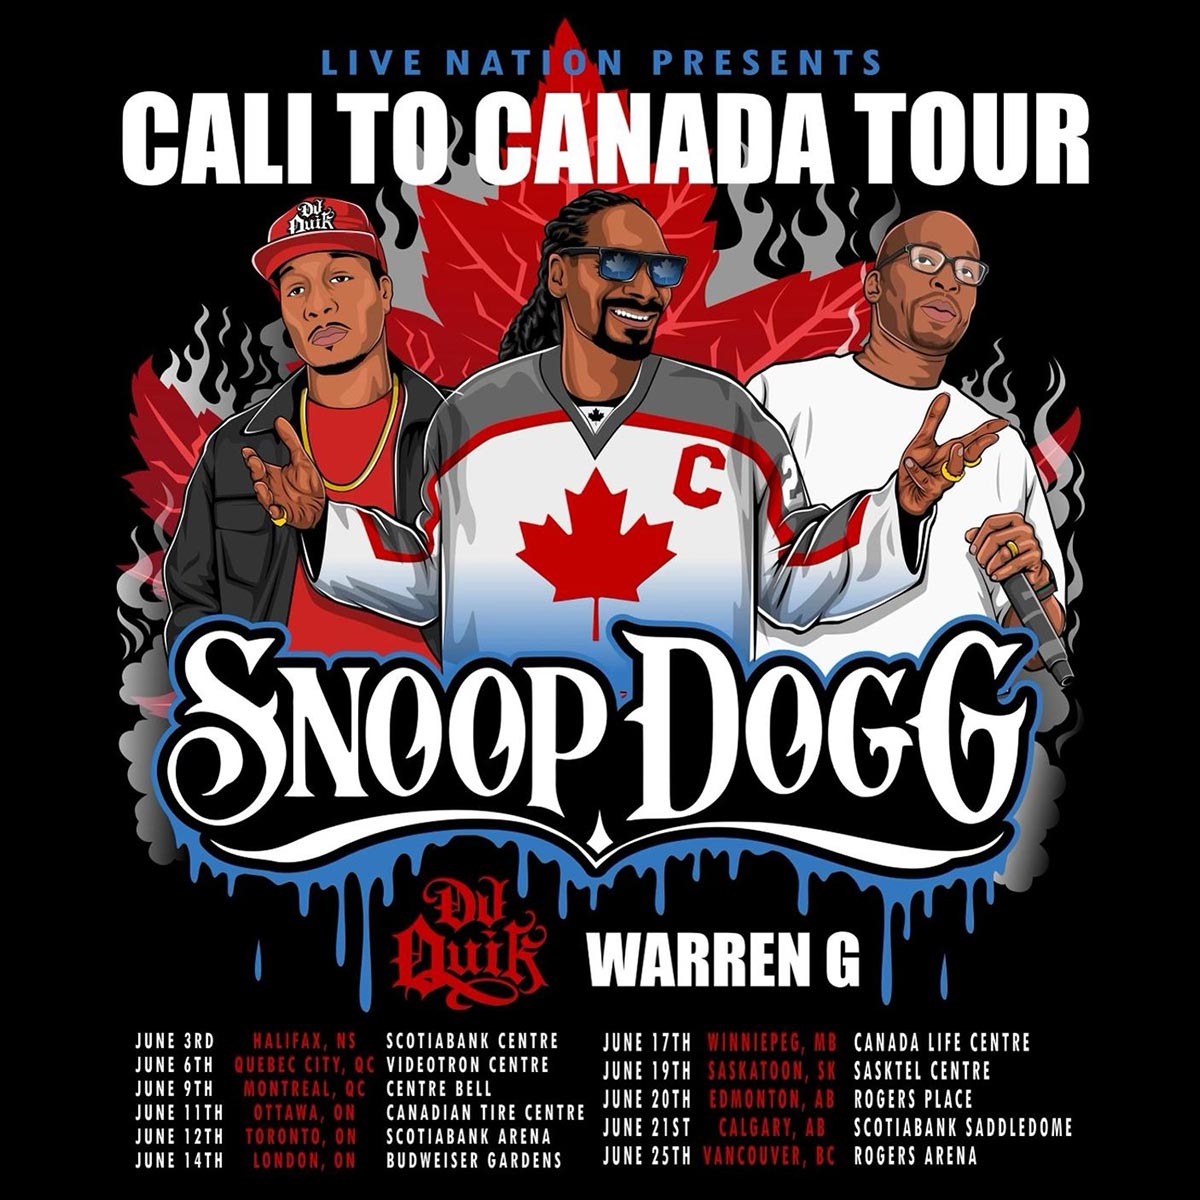 Official tour poster for the Cali To Canada Tour by Snoop Dogg